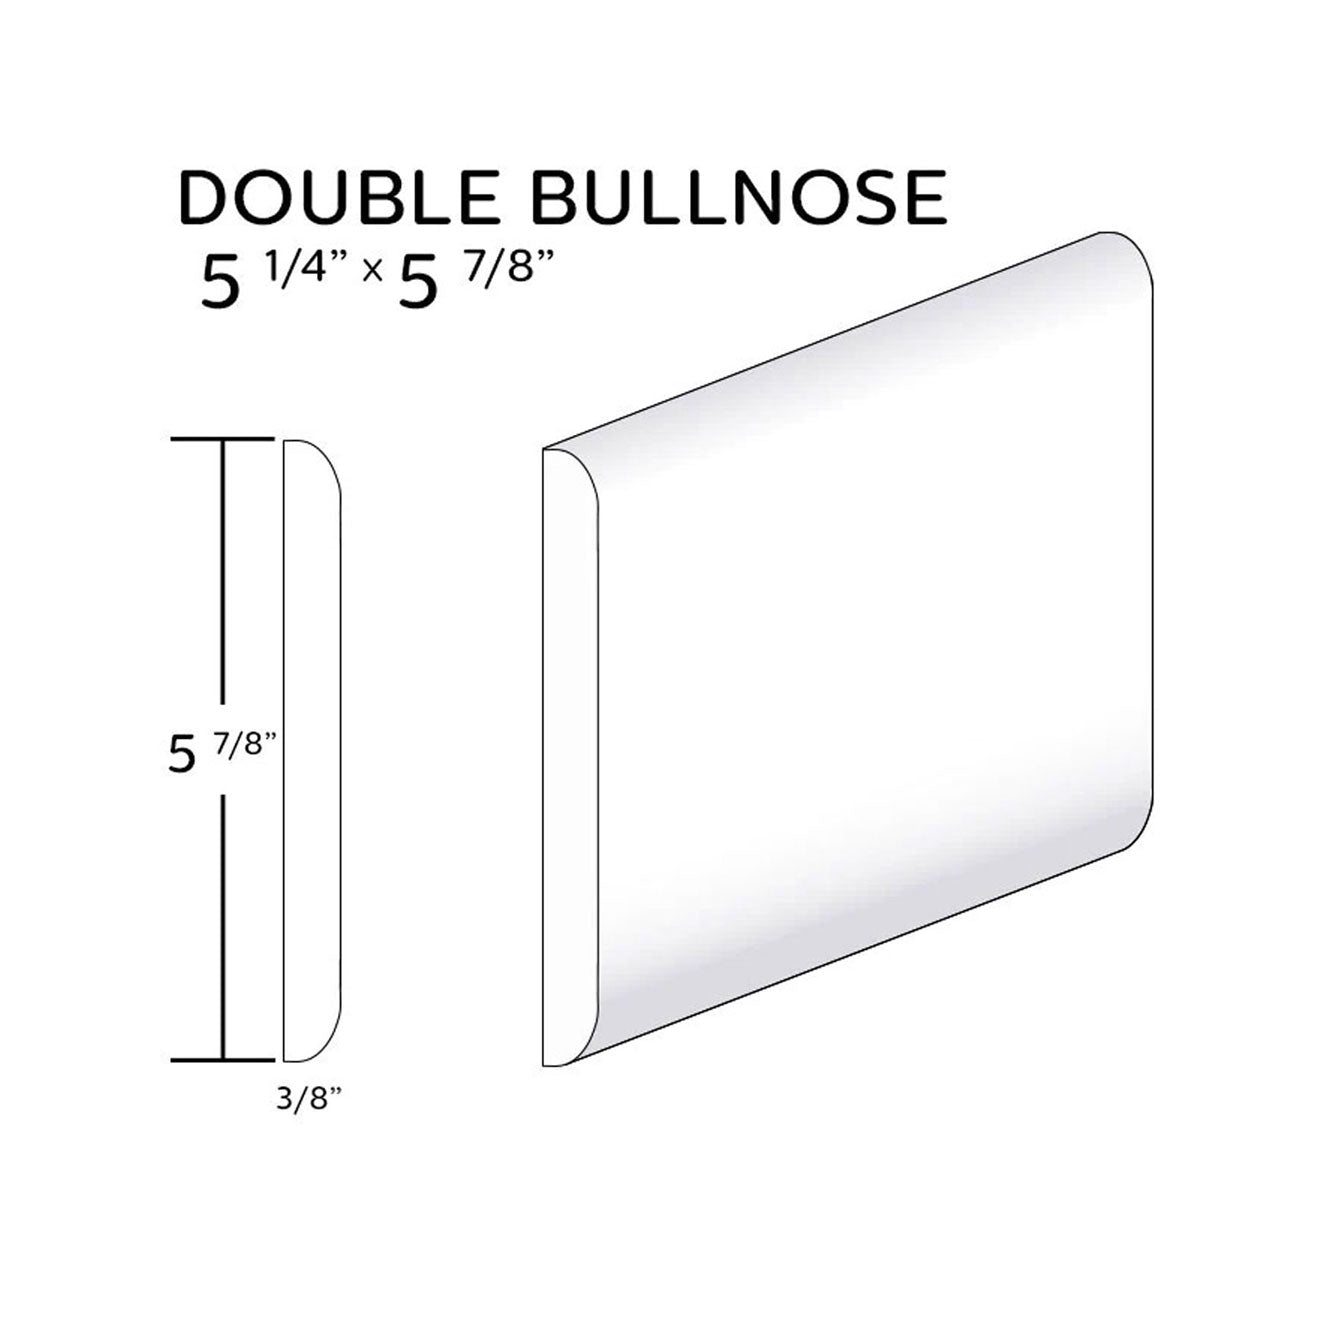 Double Bullnose